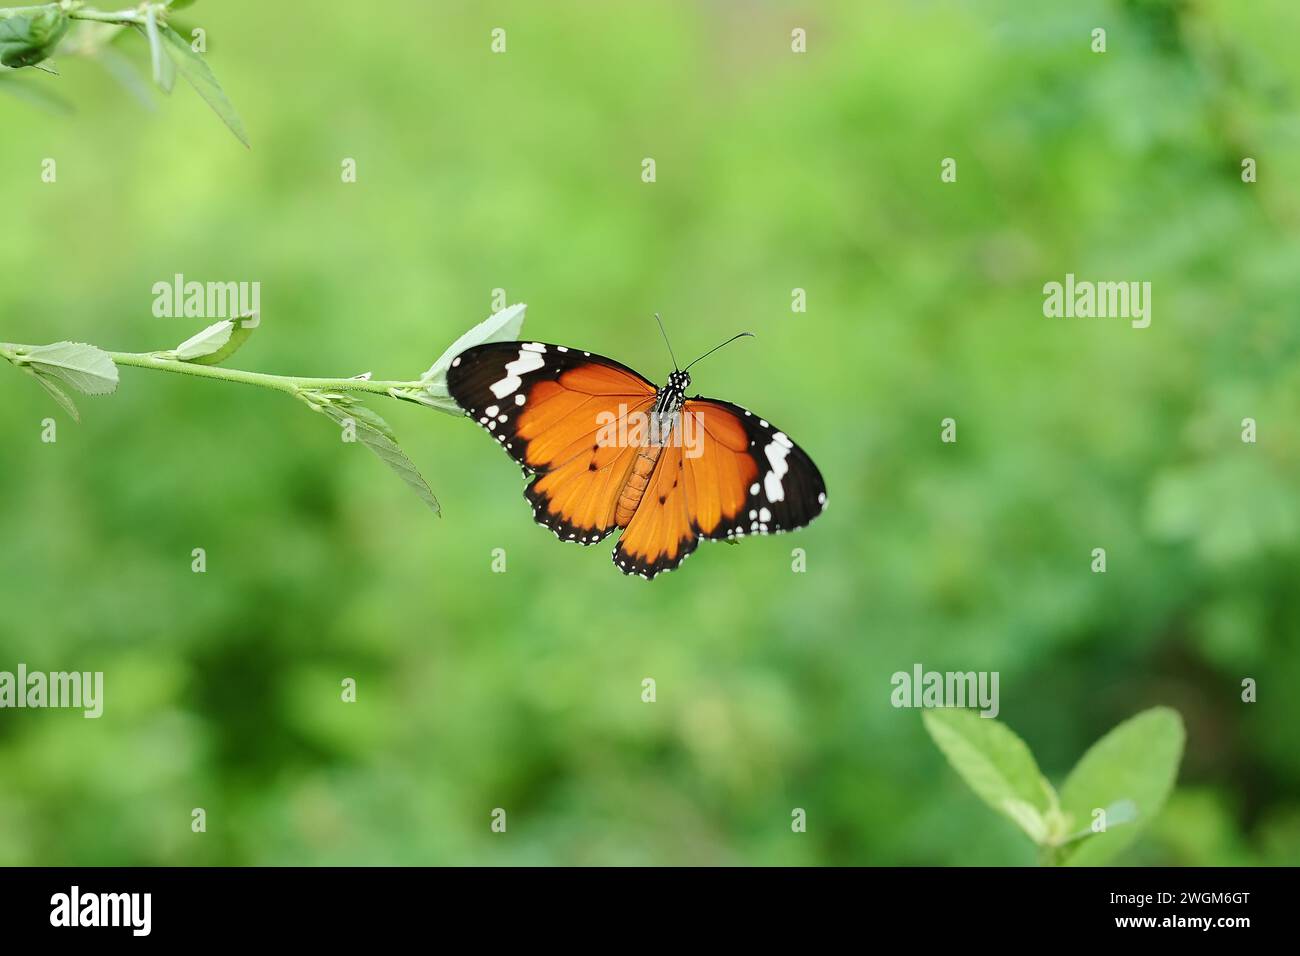 Butterfly Danaus chrysippus is perched on a branch while flapping its wings Stock Photo